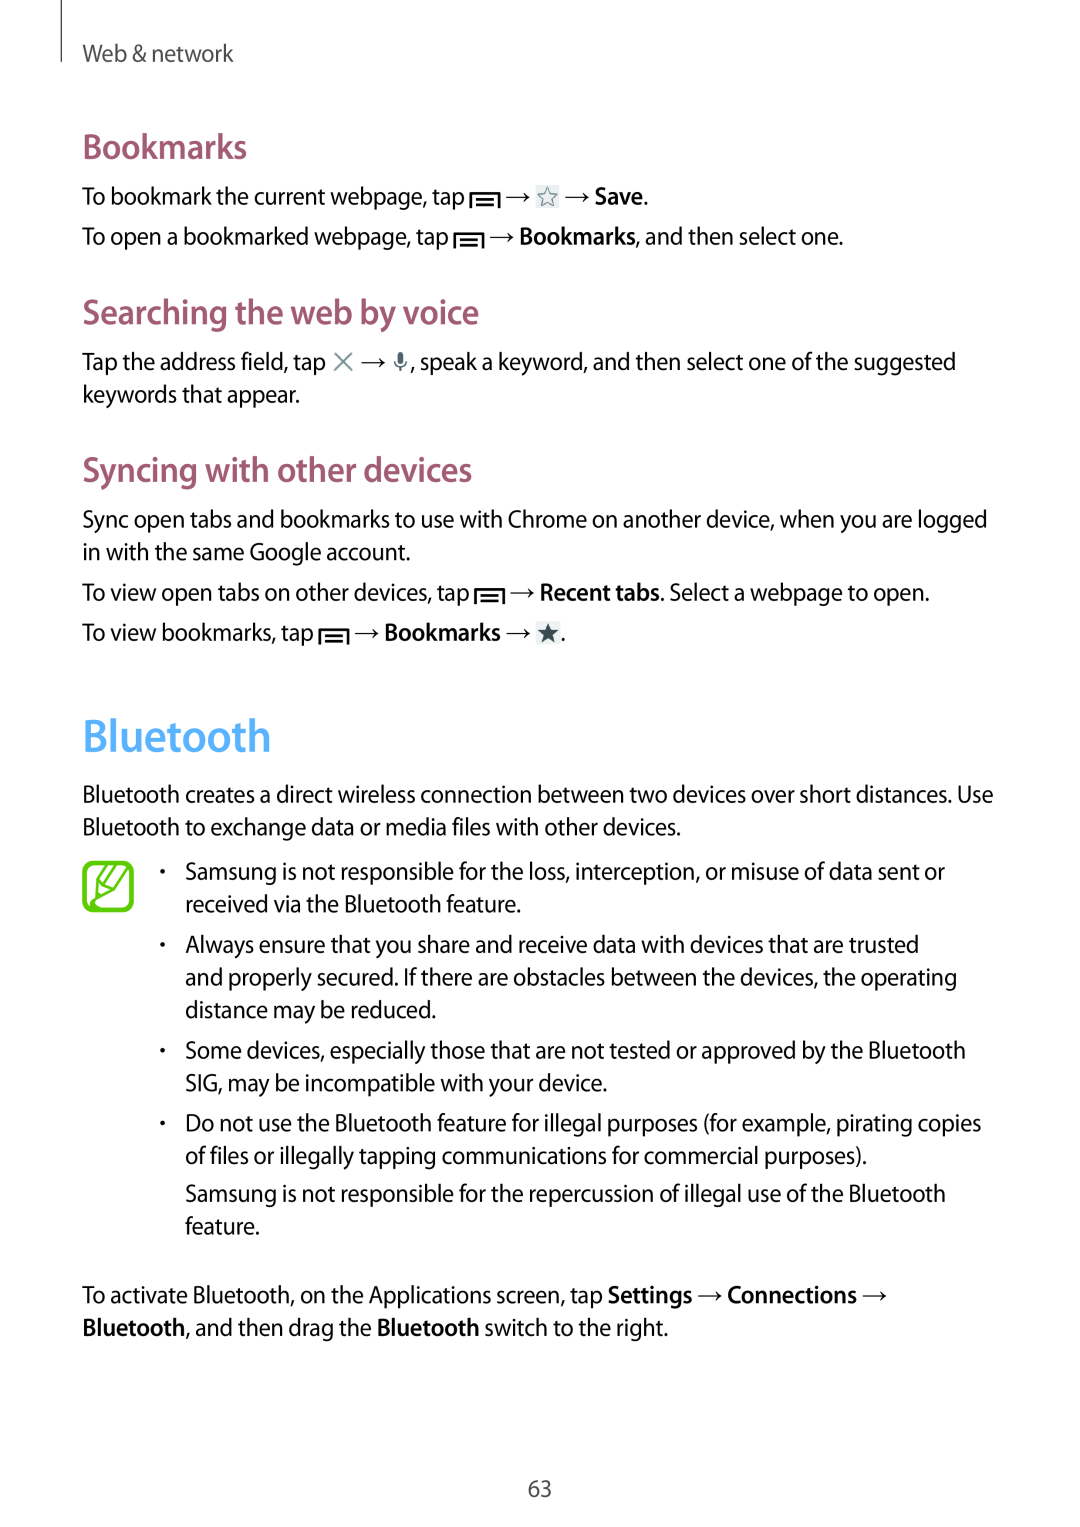 Samsung GT-I9305MBDORL manual Bluetooth, Syncing with other devices, Bookmarks, Searching the web by voice, Web & network 